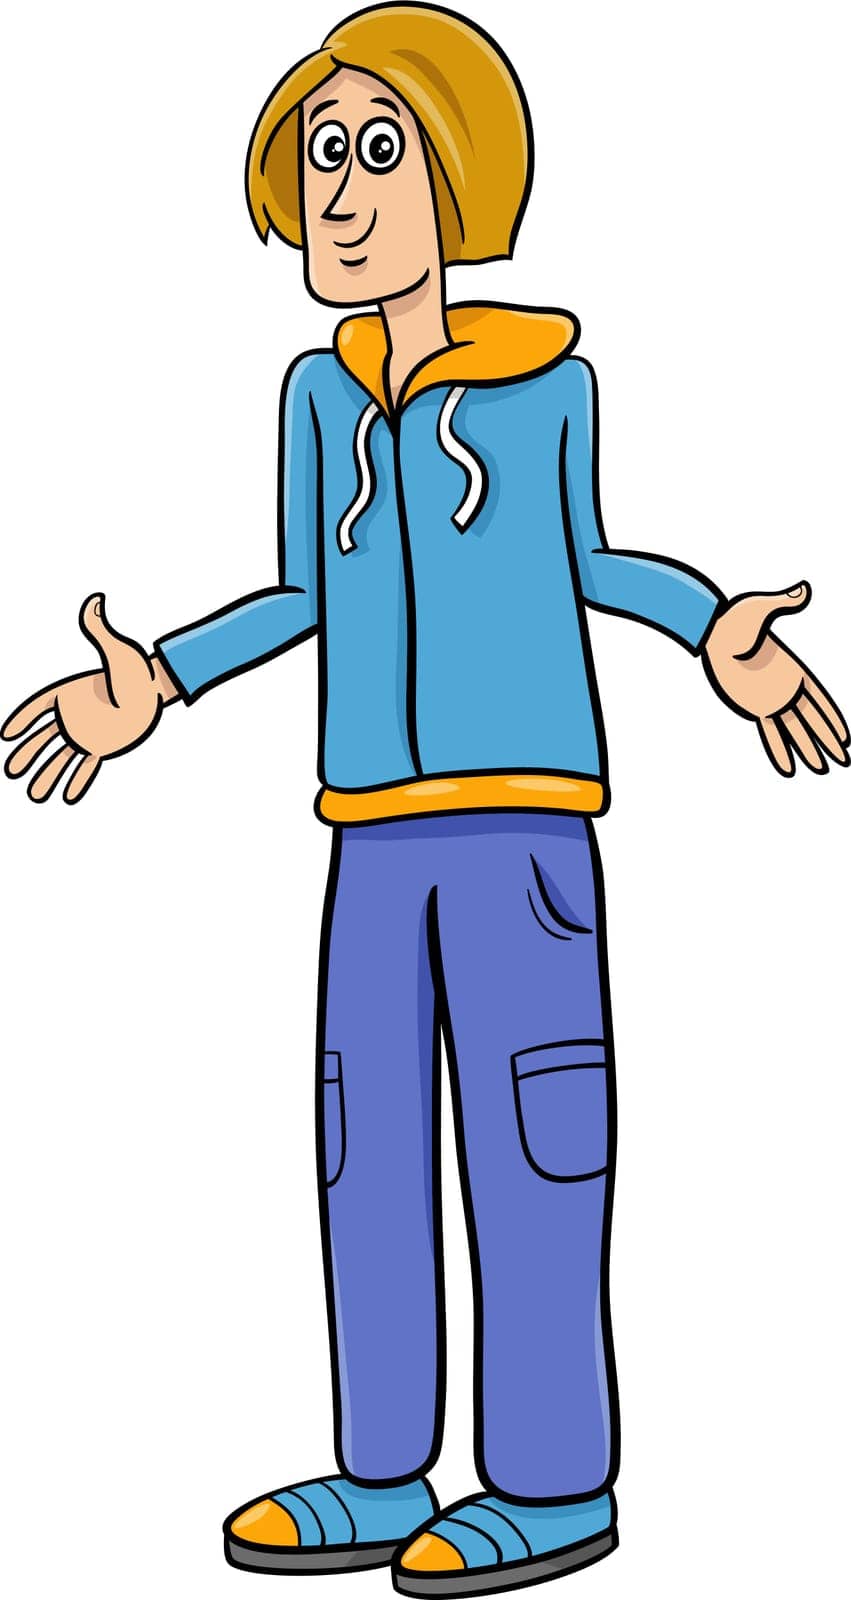 Cartoon illustration of funny young man or guy comic character